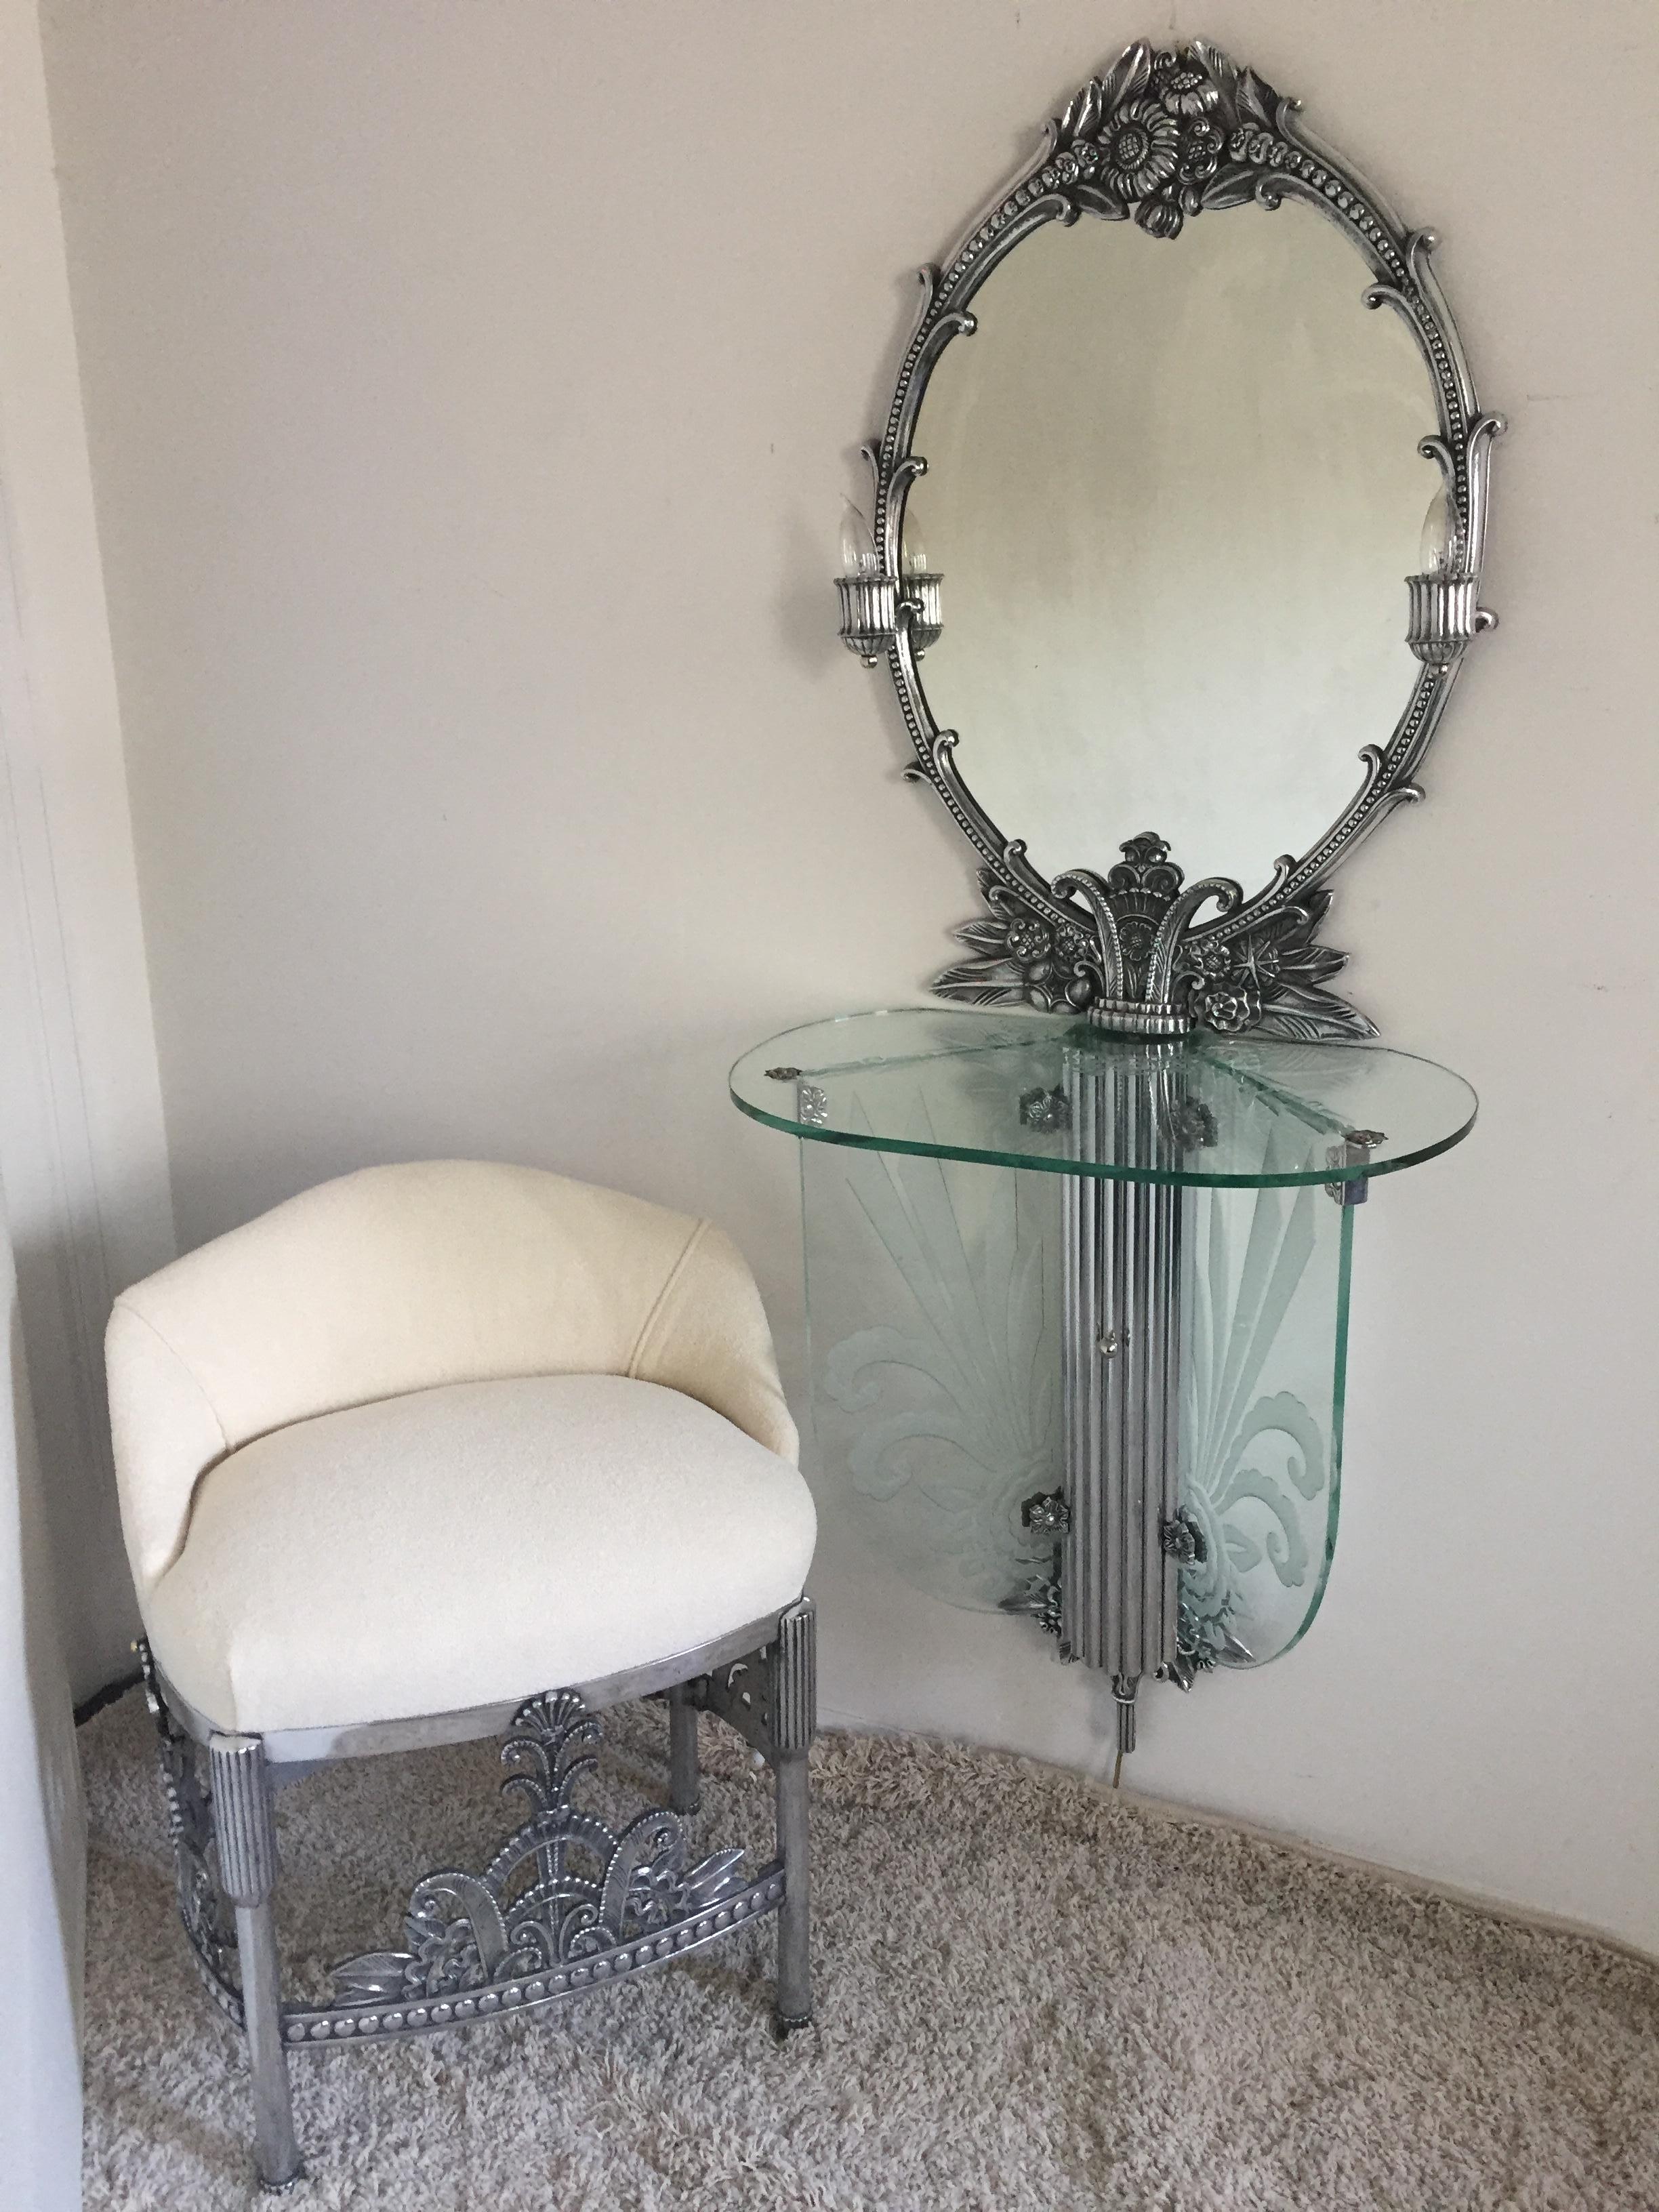 Art Deco Illuminated Vanity Together Mirror with Stool Paramount Theater Boston For Sale 2